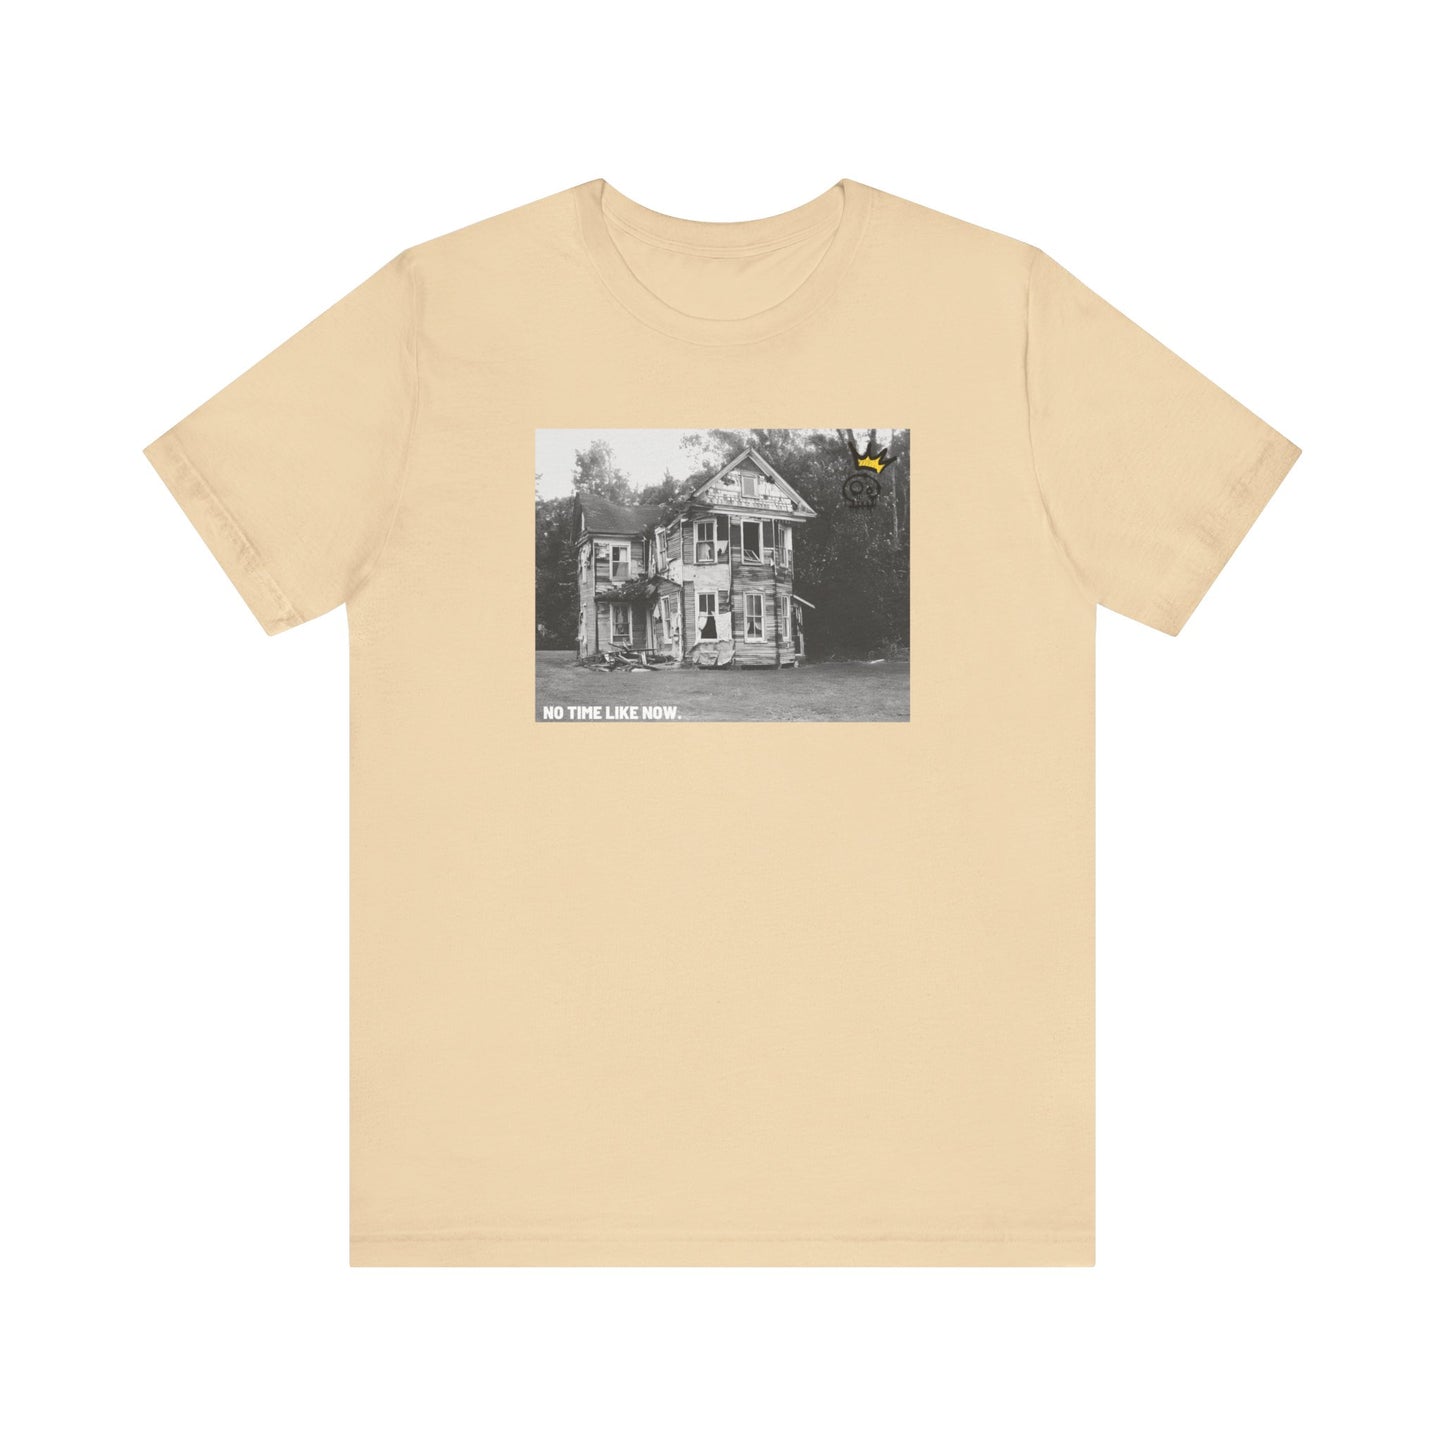 “No time like now” Abandoned Building Tee